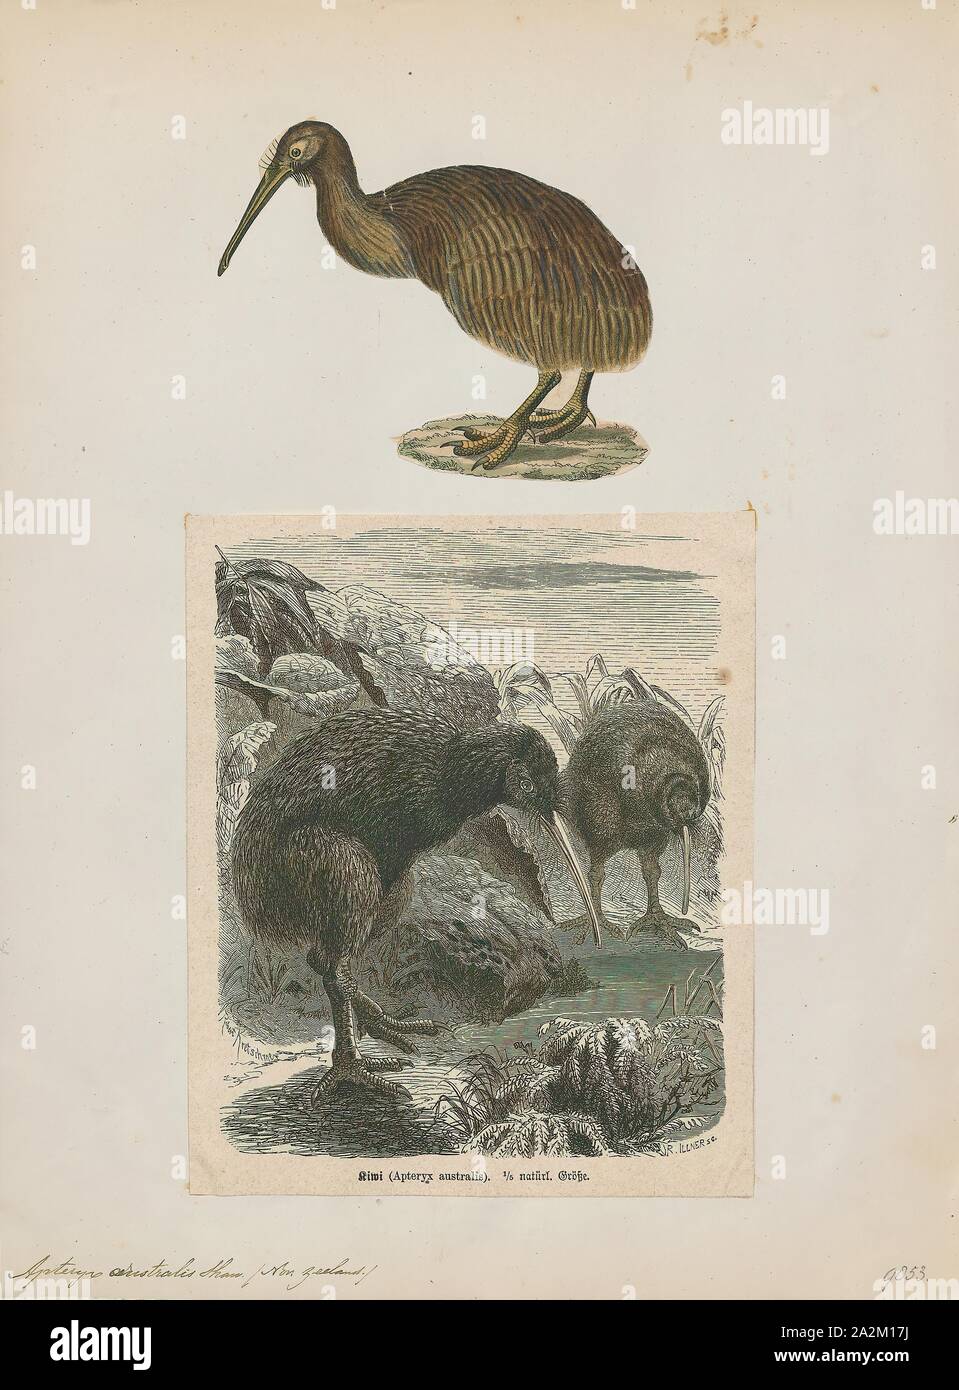 Apteryx australis, Print, The southern brown kiwi, tokoeka, or common kiwi (Apteryx australis) is a species of kiwi from New Zealand's South Island. Until 2000 it was considered conspecific with the North Island brown kiwi, and still is by some authorities., 1700-1880 Stock Photo